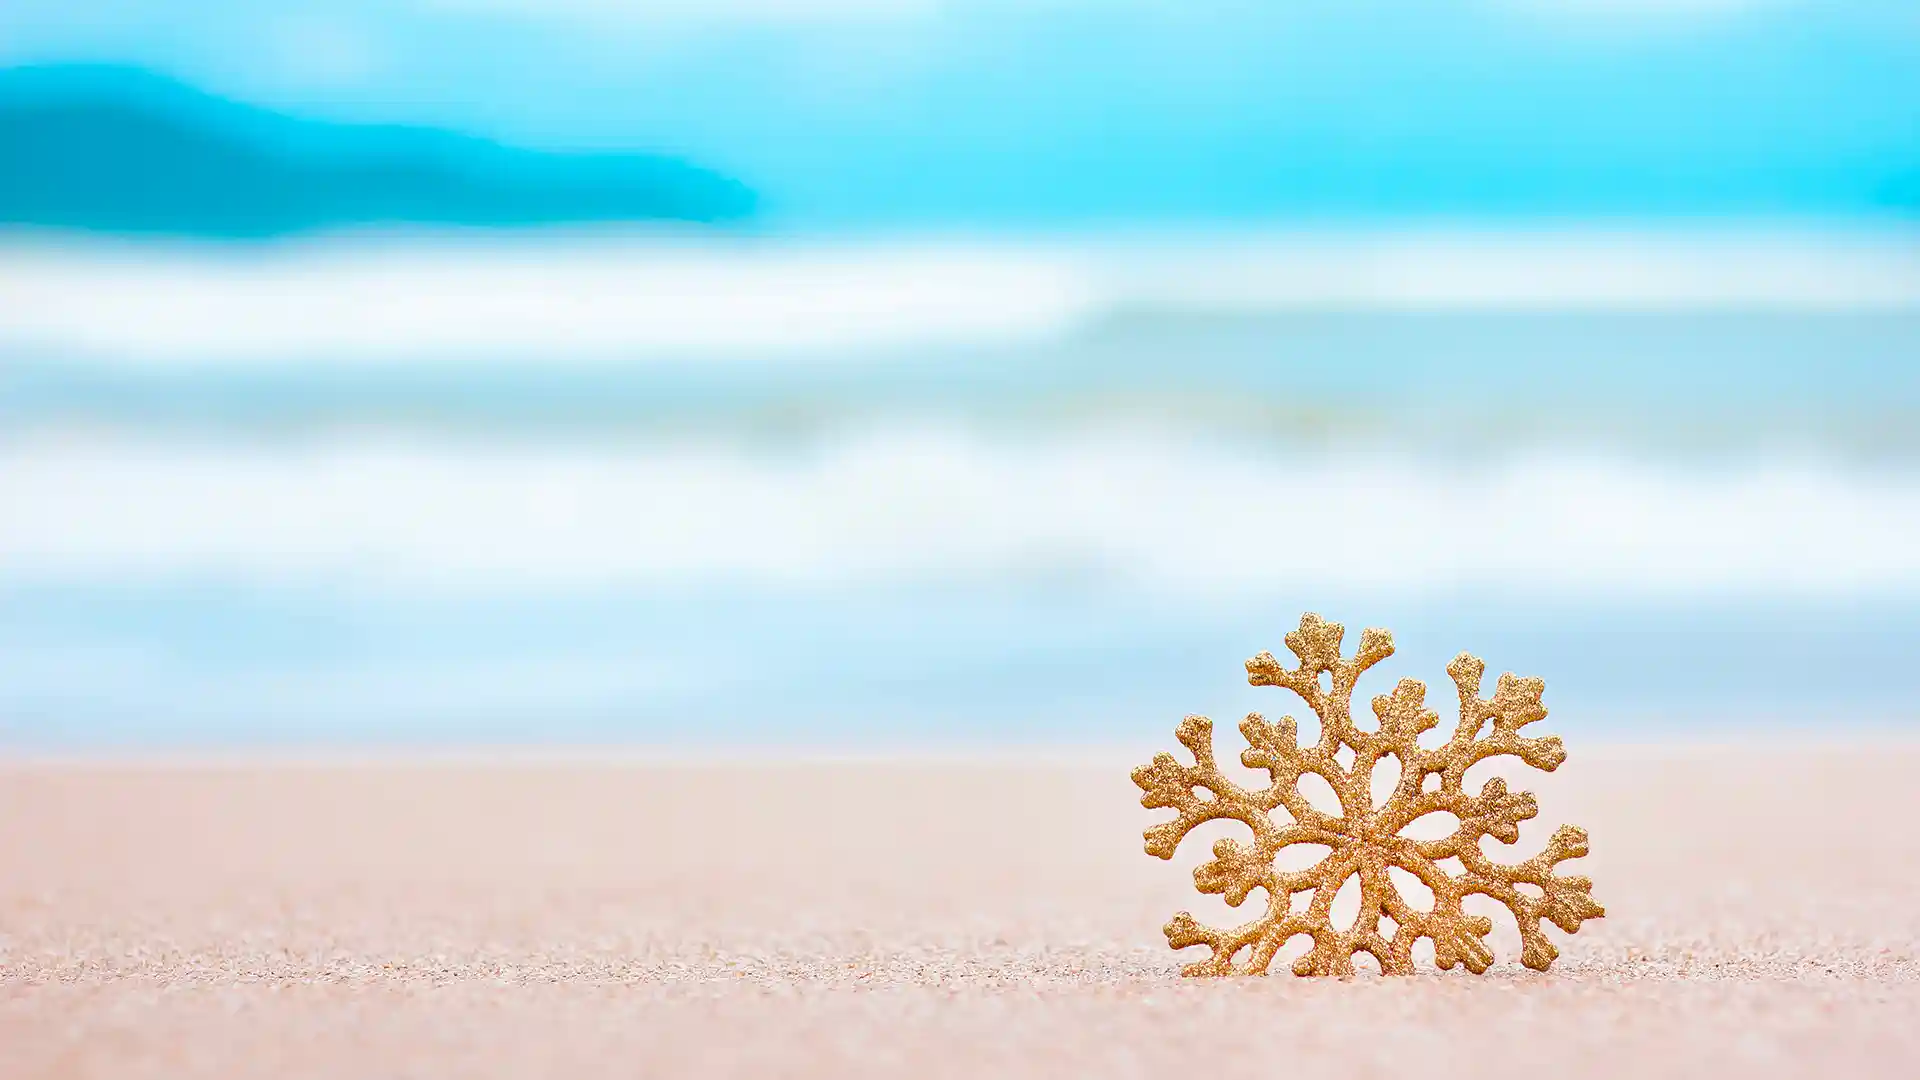 Golden snowflake in the sand with ocean waves in the background.